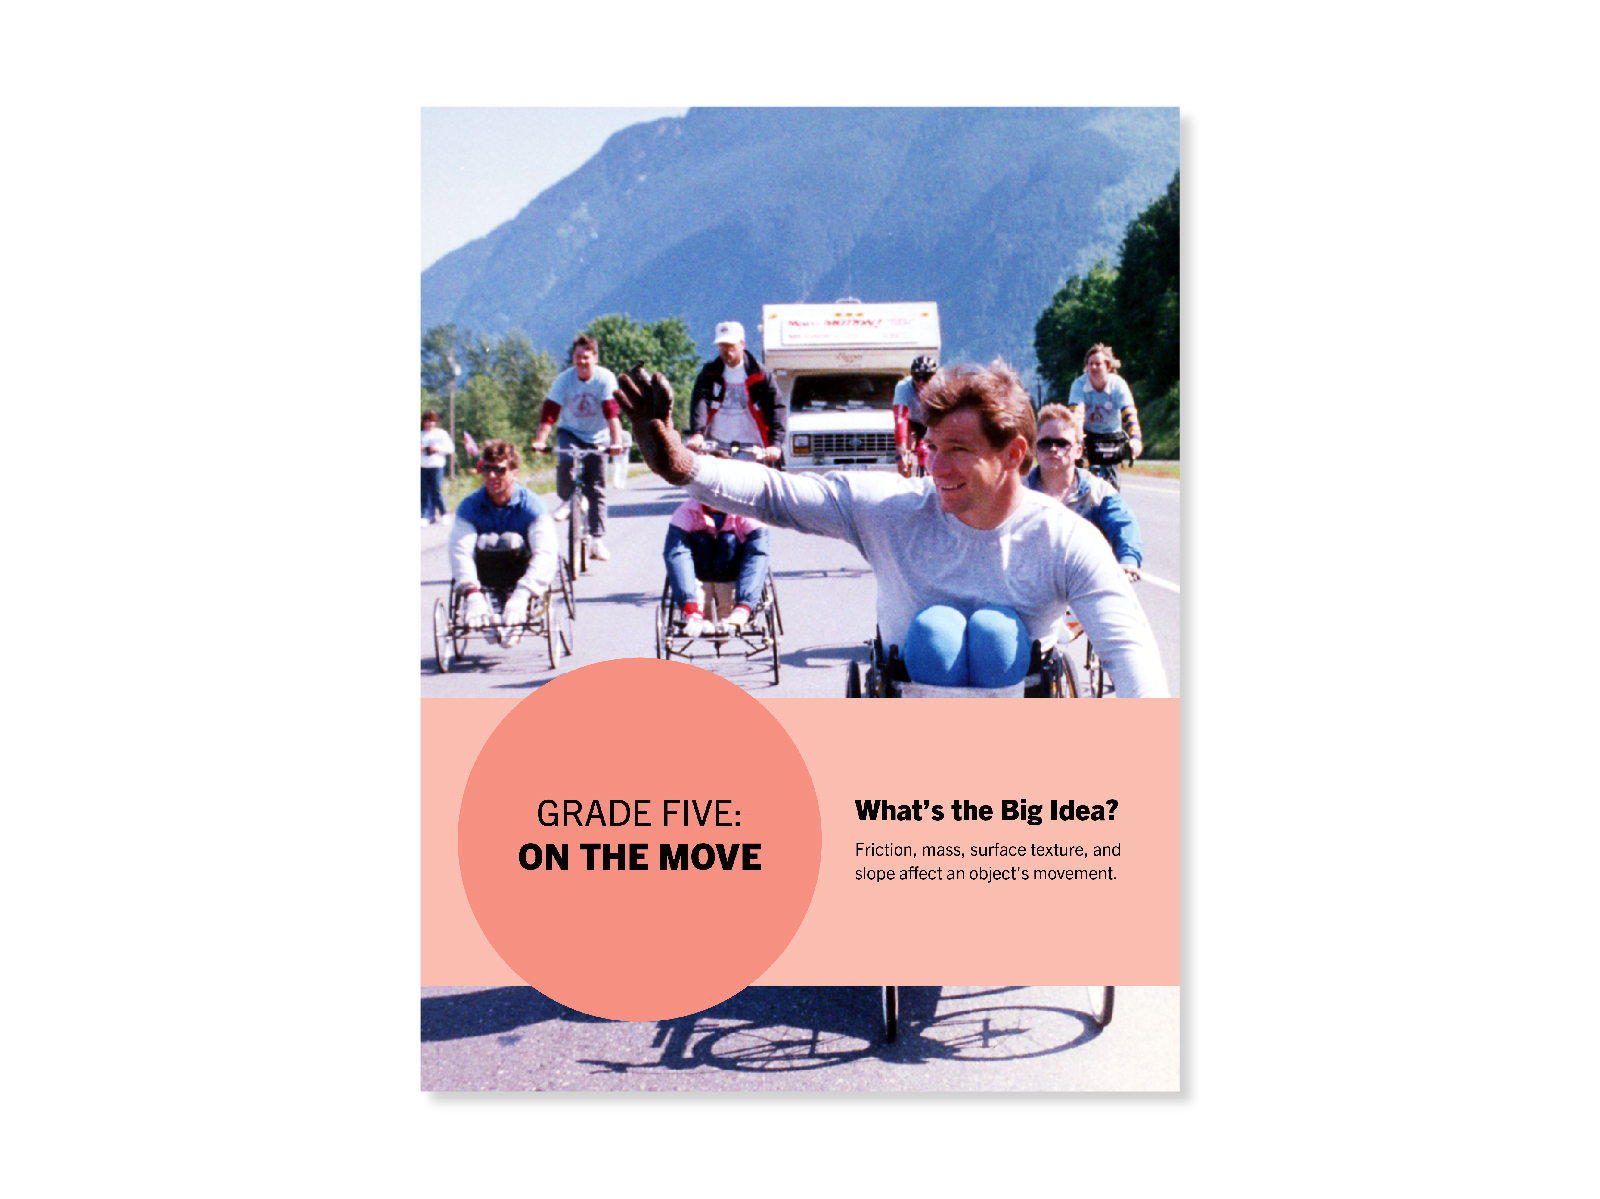 Image from the Rick Hansen Man In Motion World Tour of Rick wheeling down a road in front of a mountain, while waving at onlookers off screen. He is joined by a few other wheelers behind him, as well as four cyclists and the Tour motorhome. Cover for "On the Move" lesson.